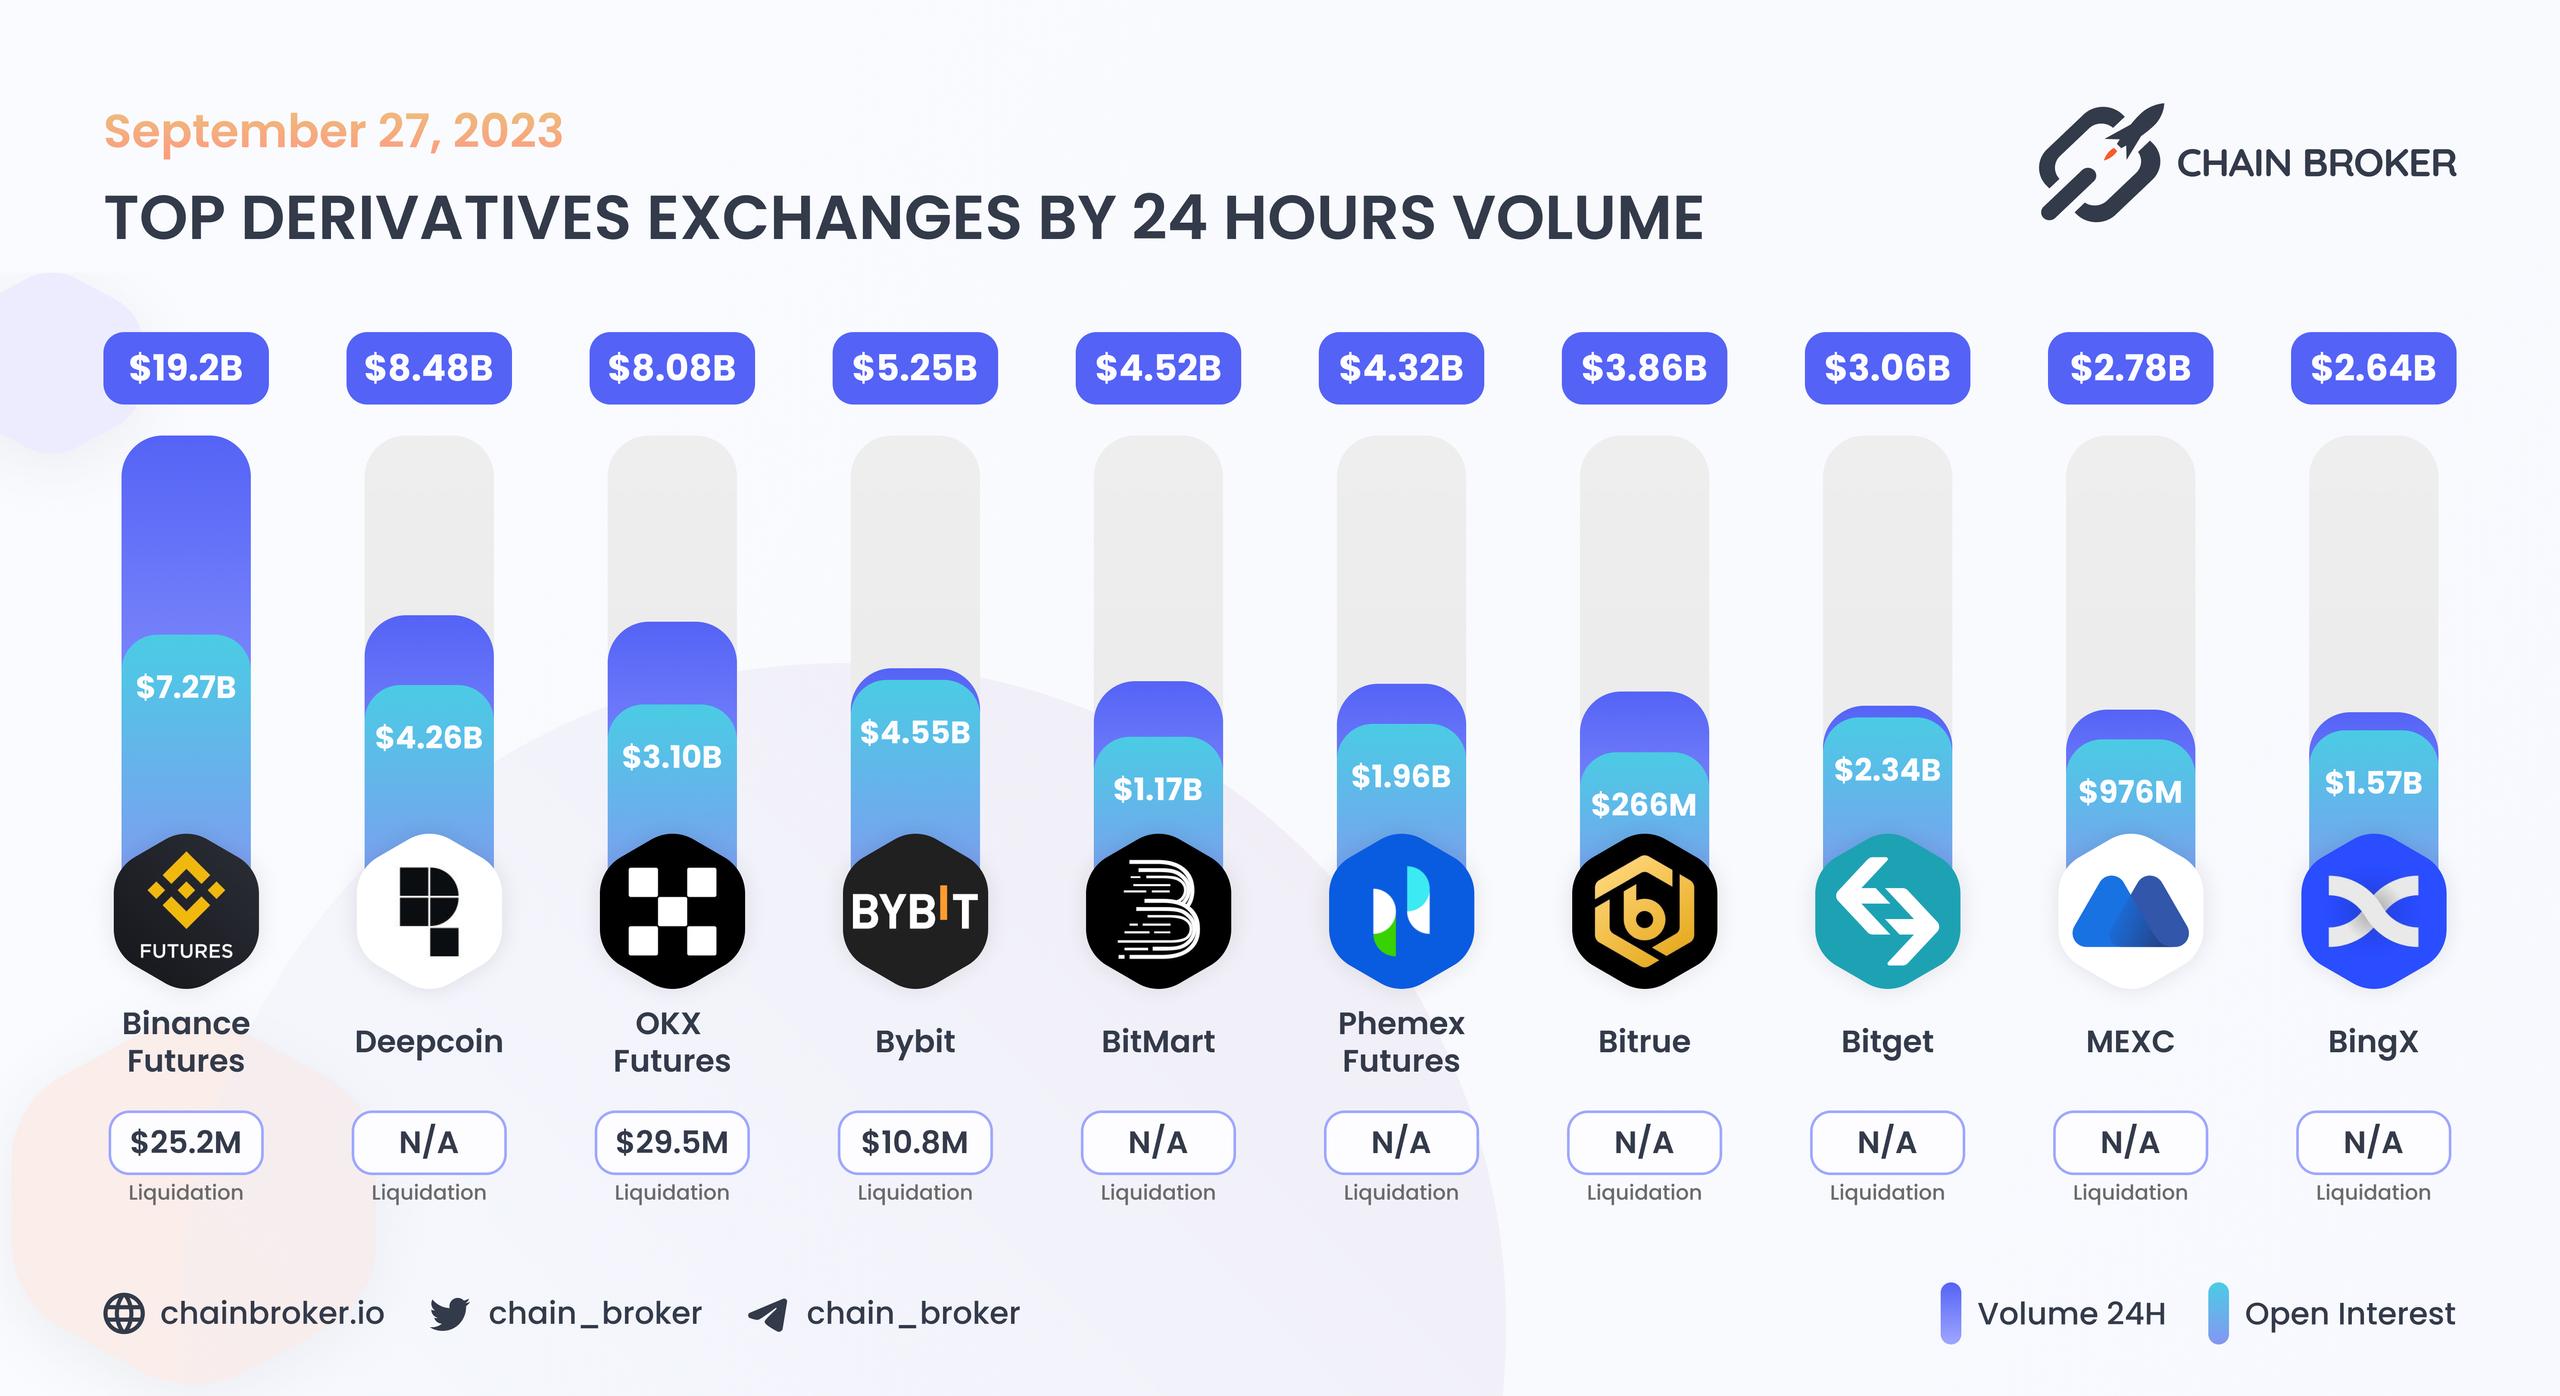 Top derivatives exchanges by 24H Volume